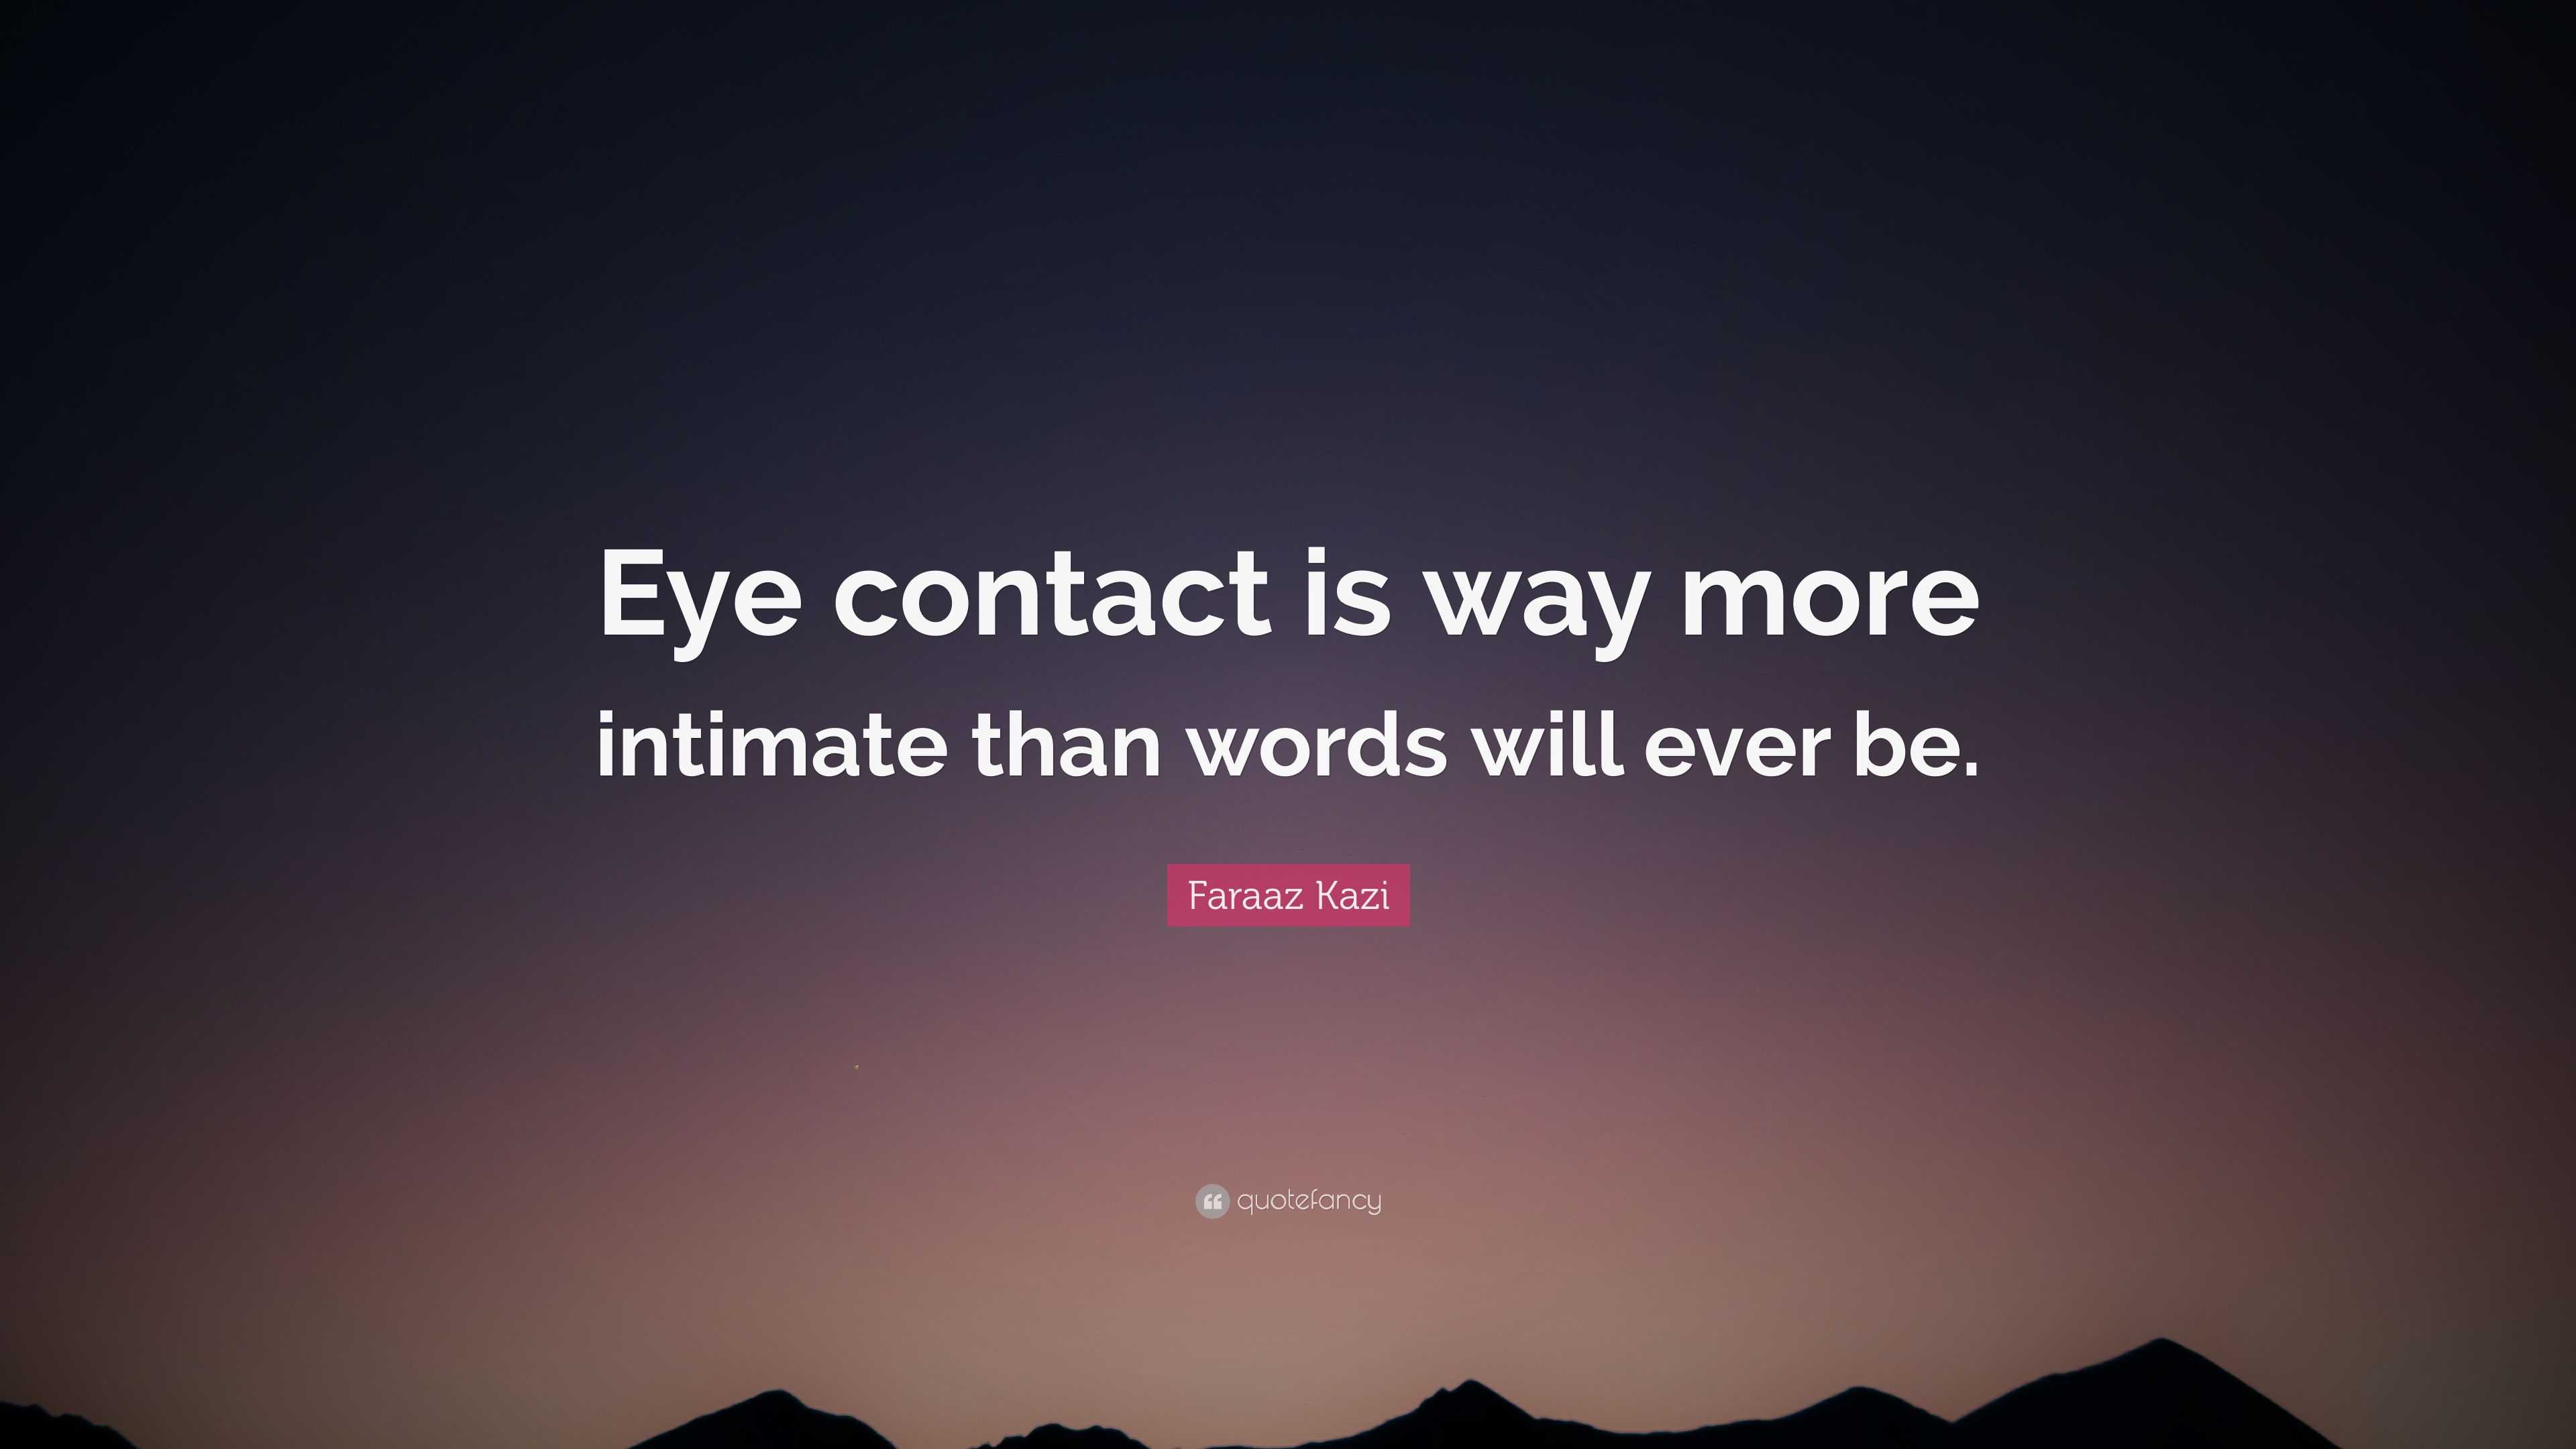 an eye for an eye quote